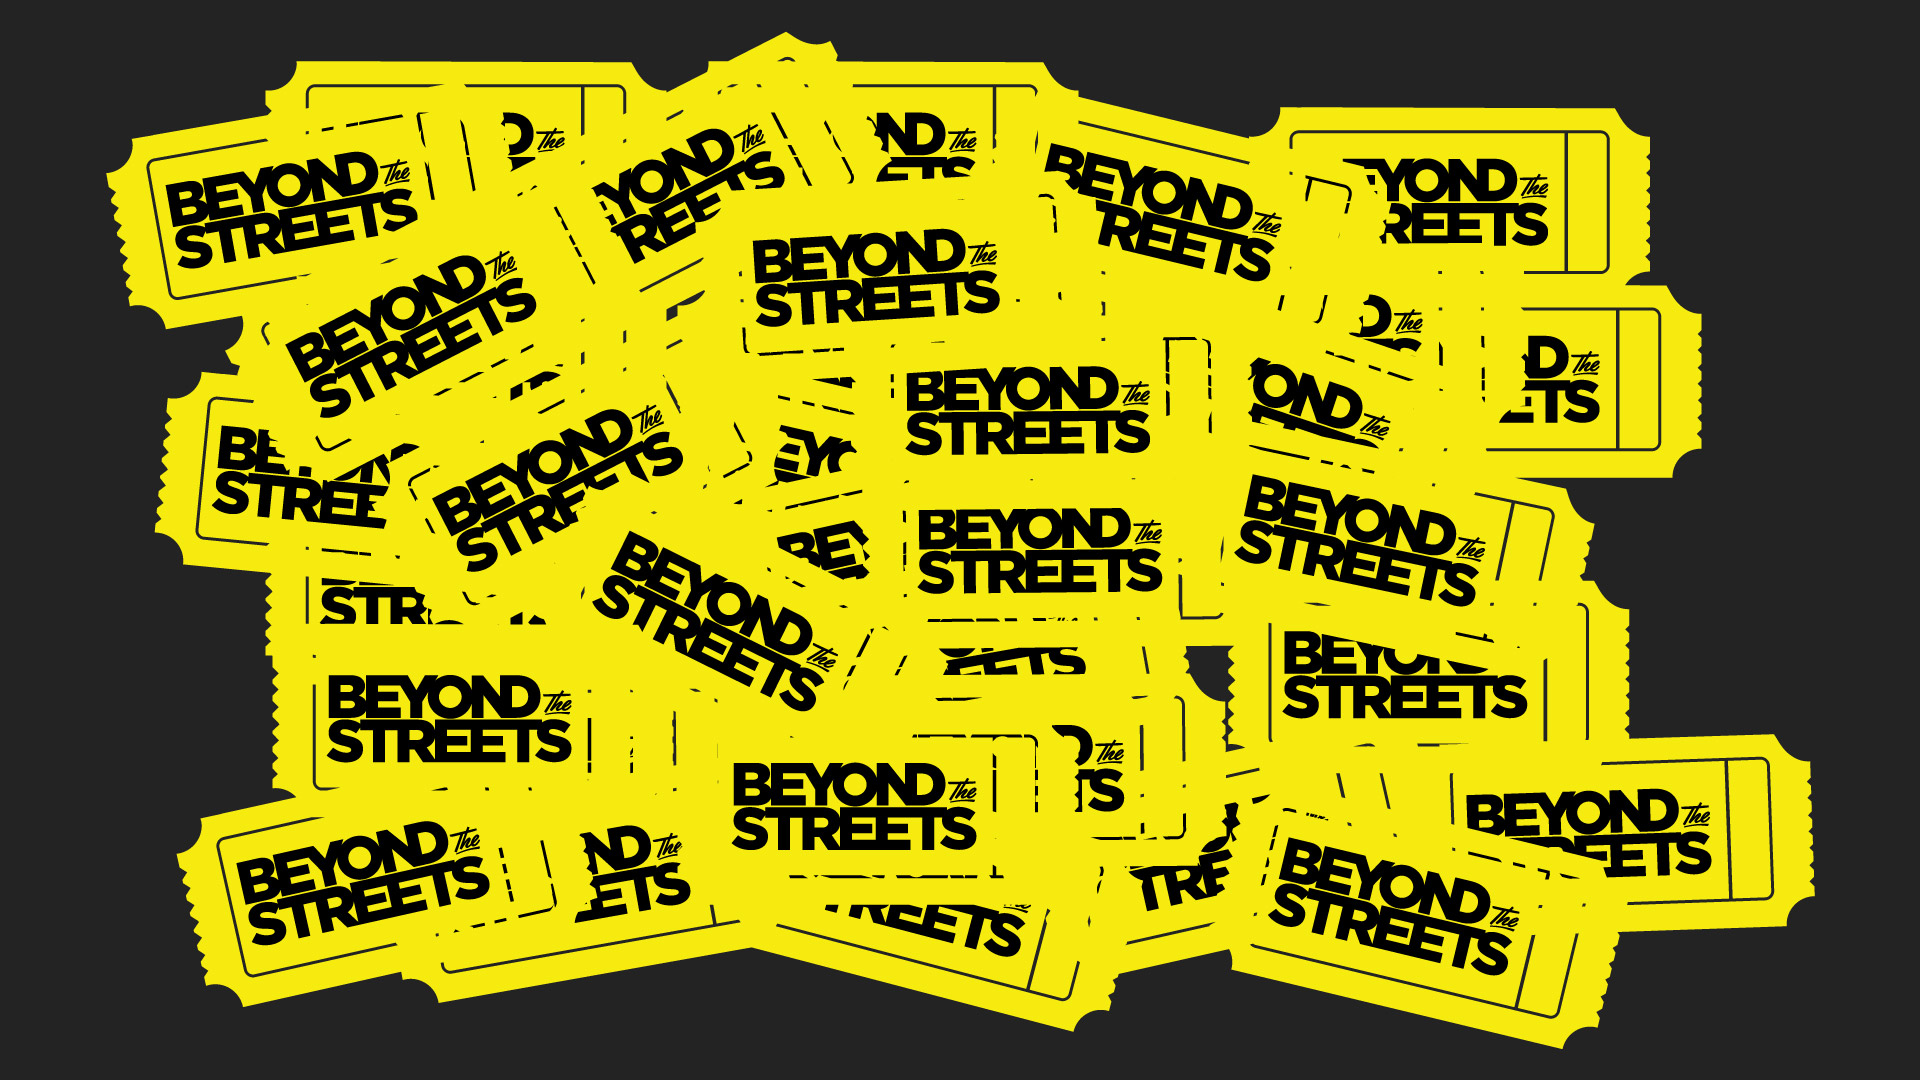 adidas-beyond-the-streets-tickets